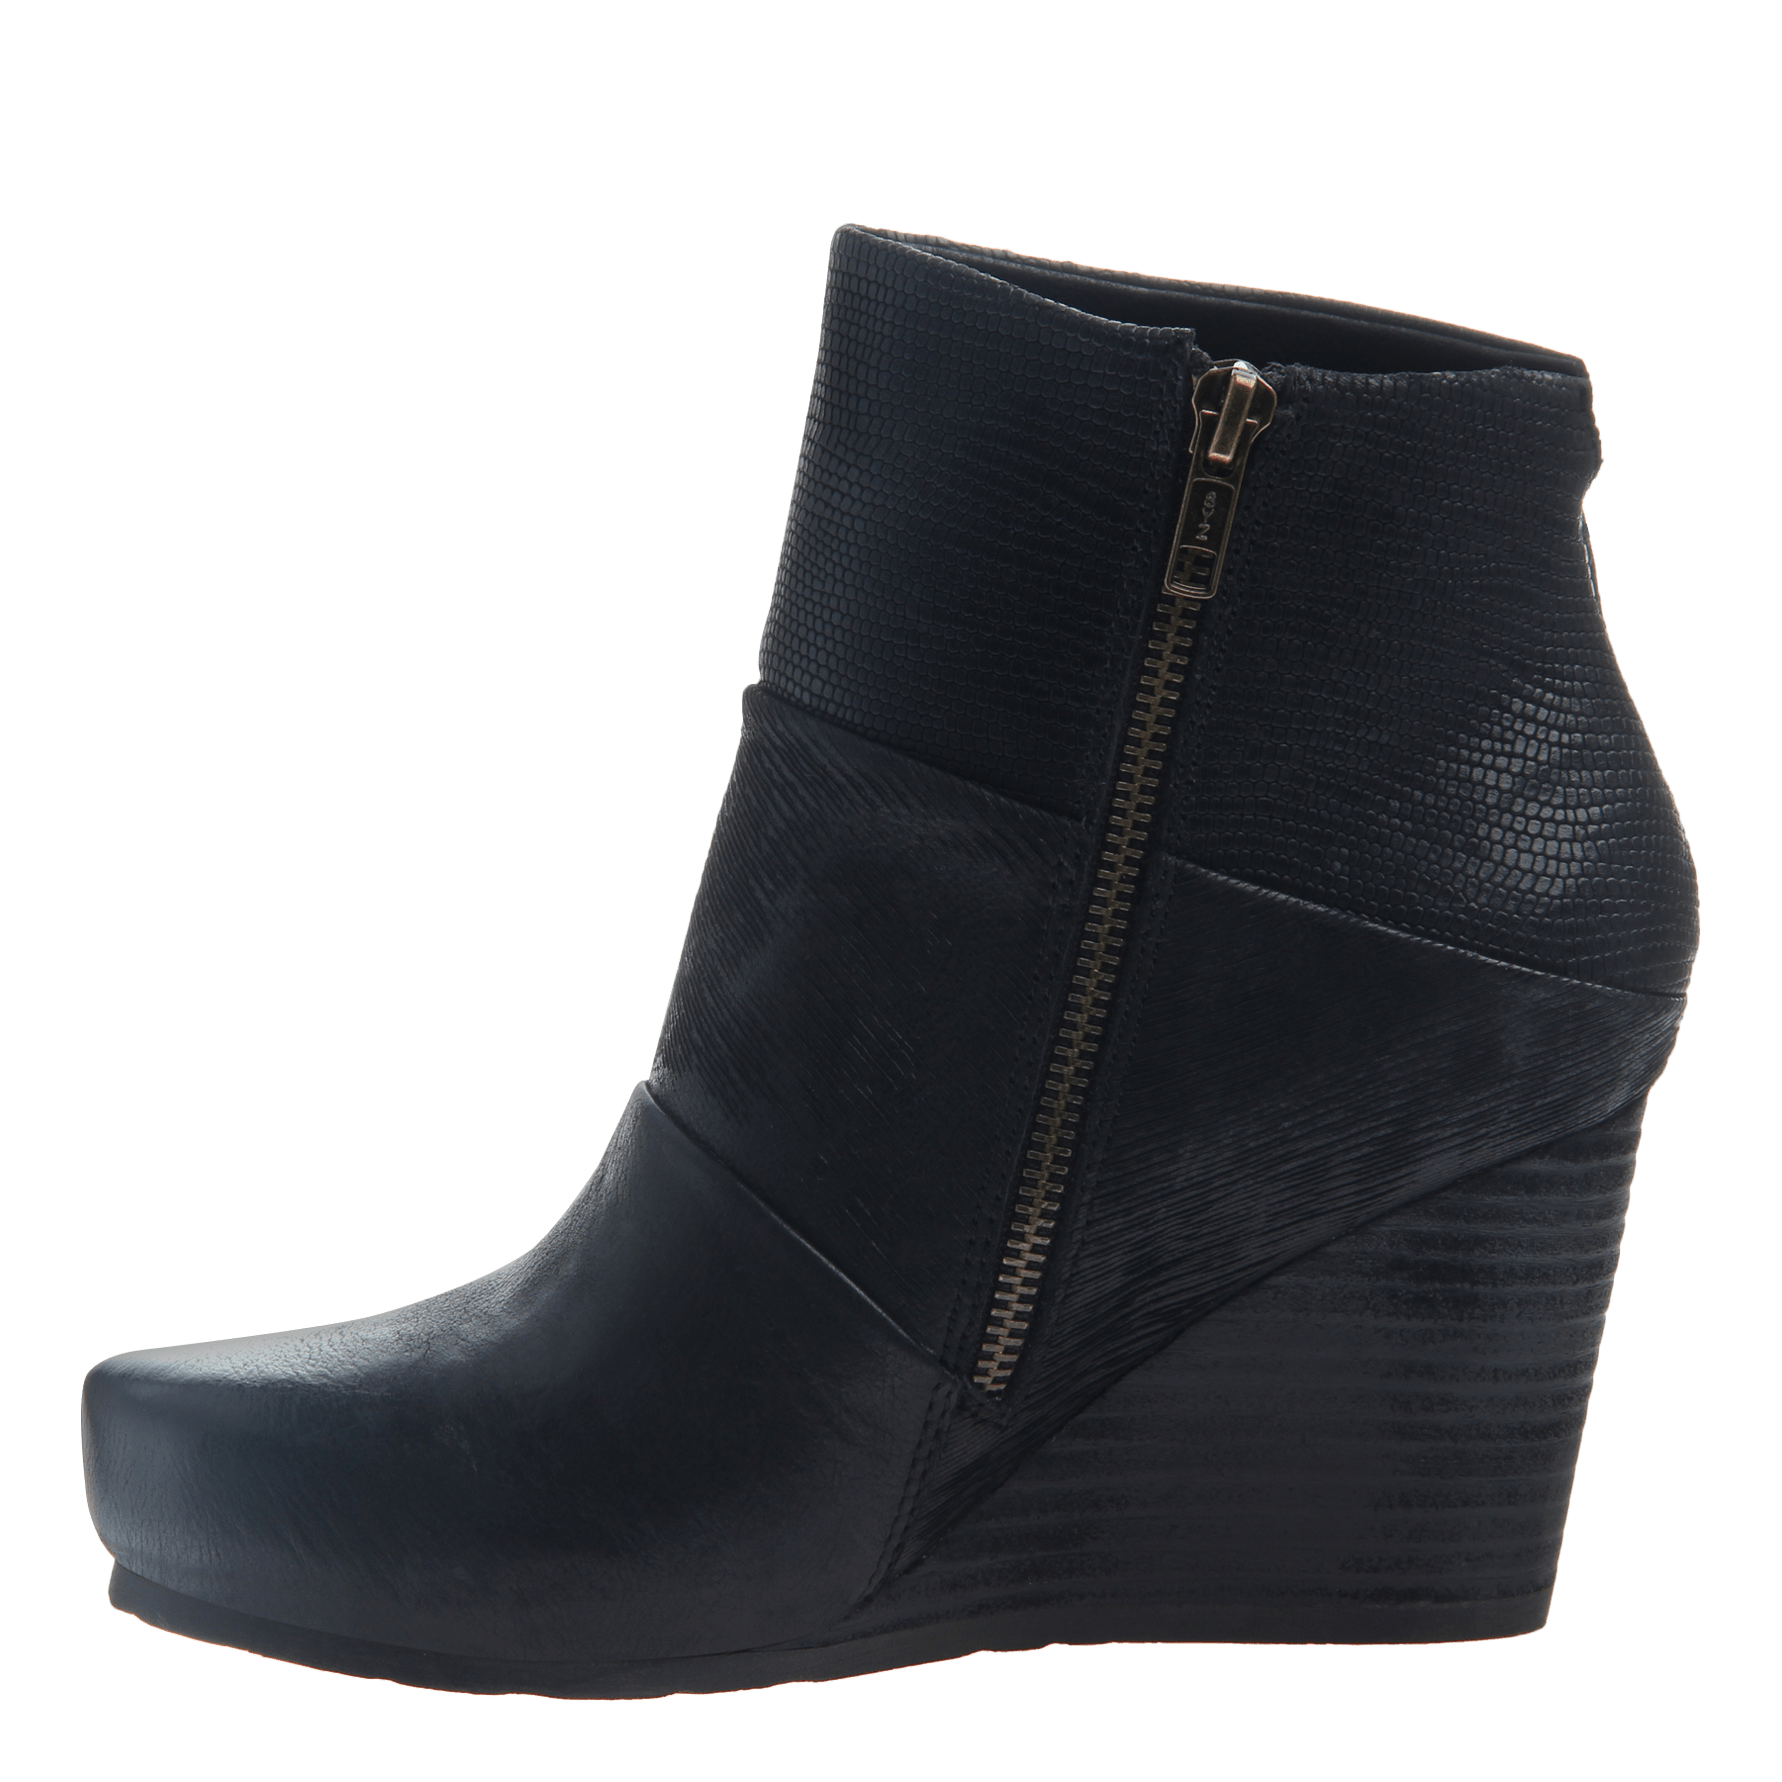 Dharma in Black Ankle Boots | Women's Shoes by OTBT